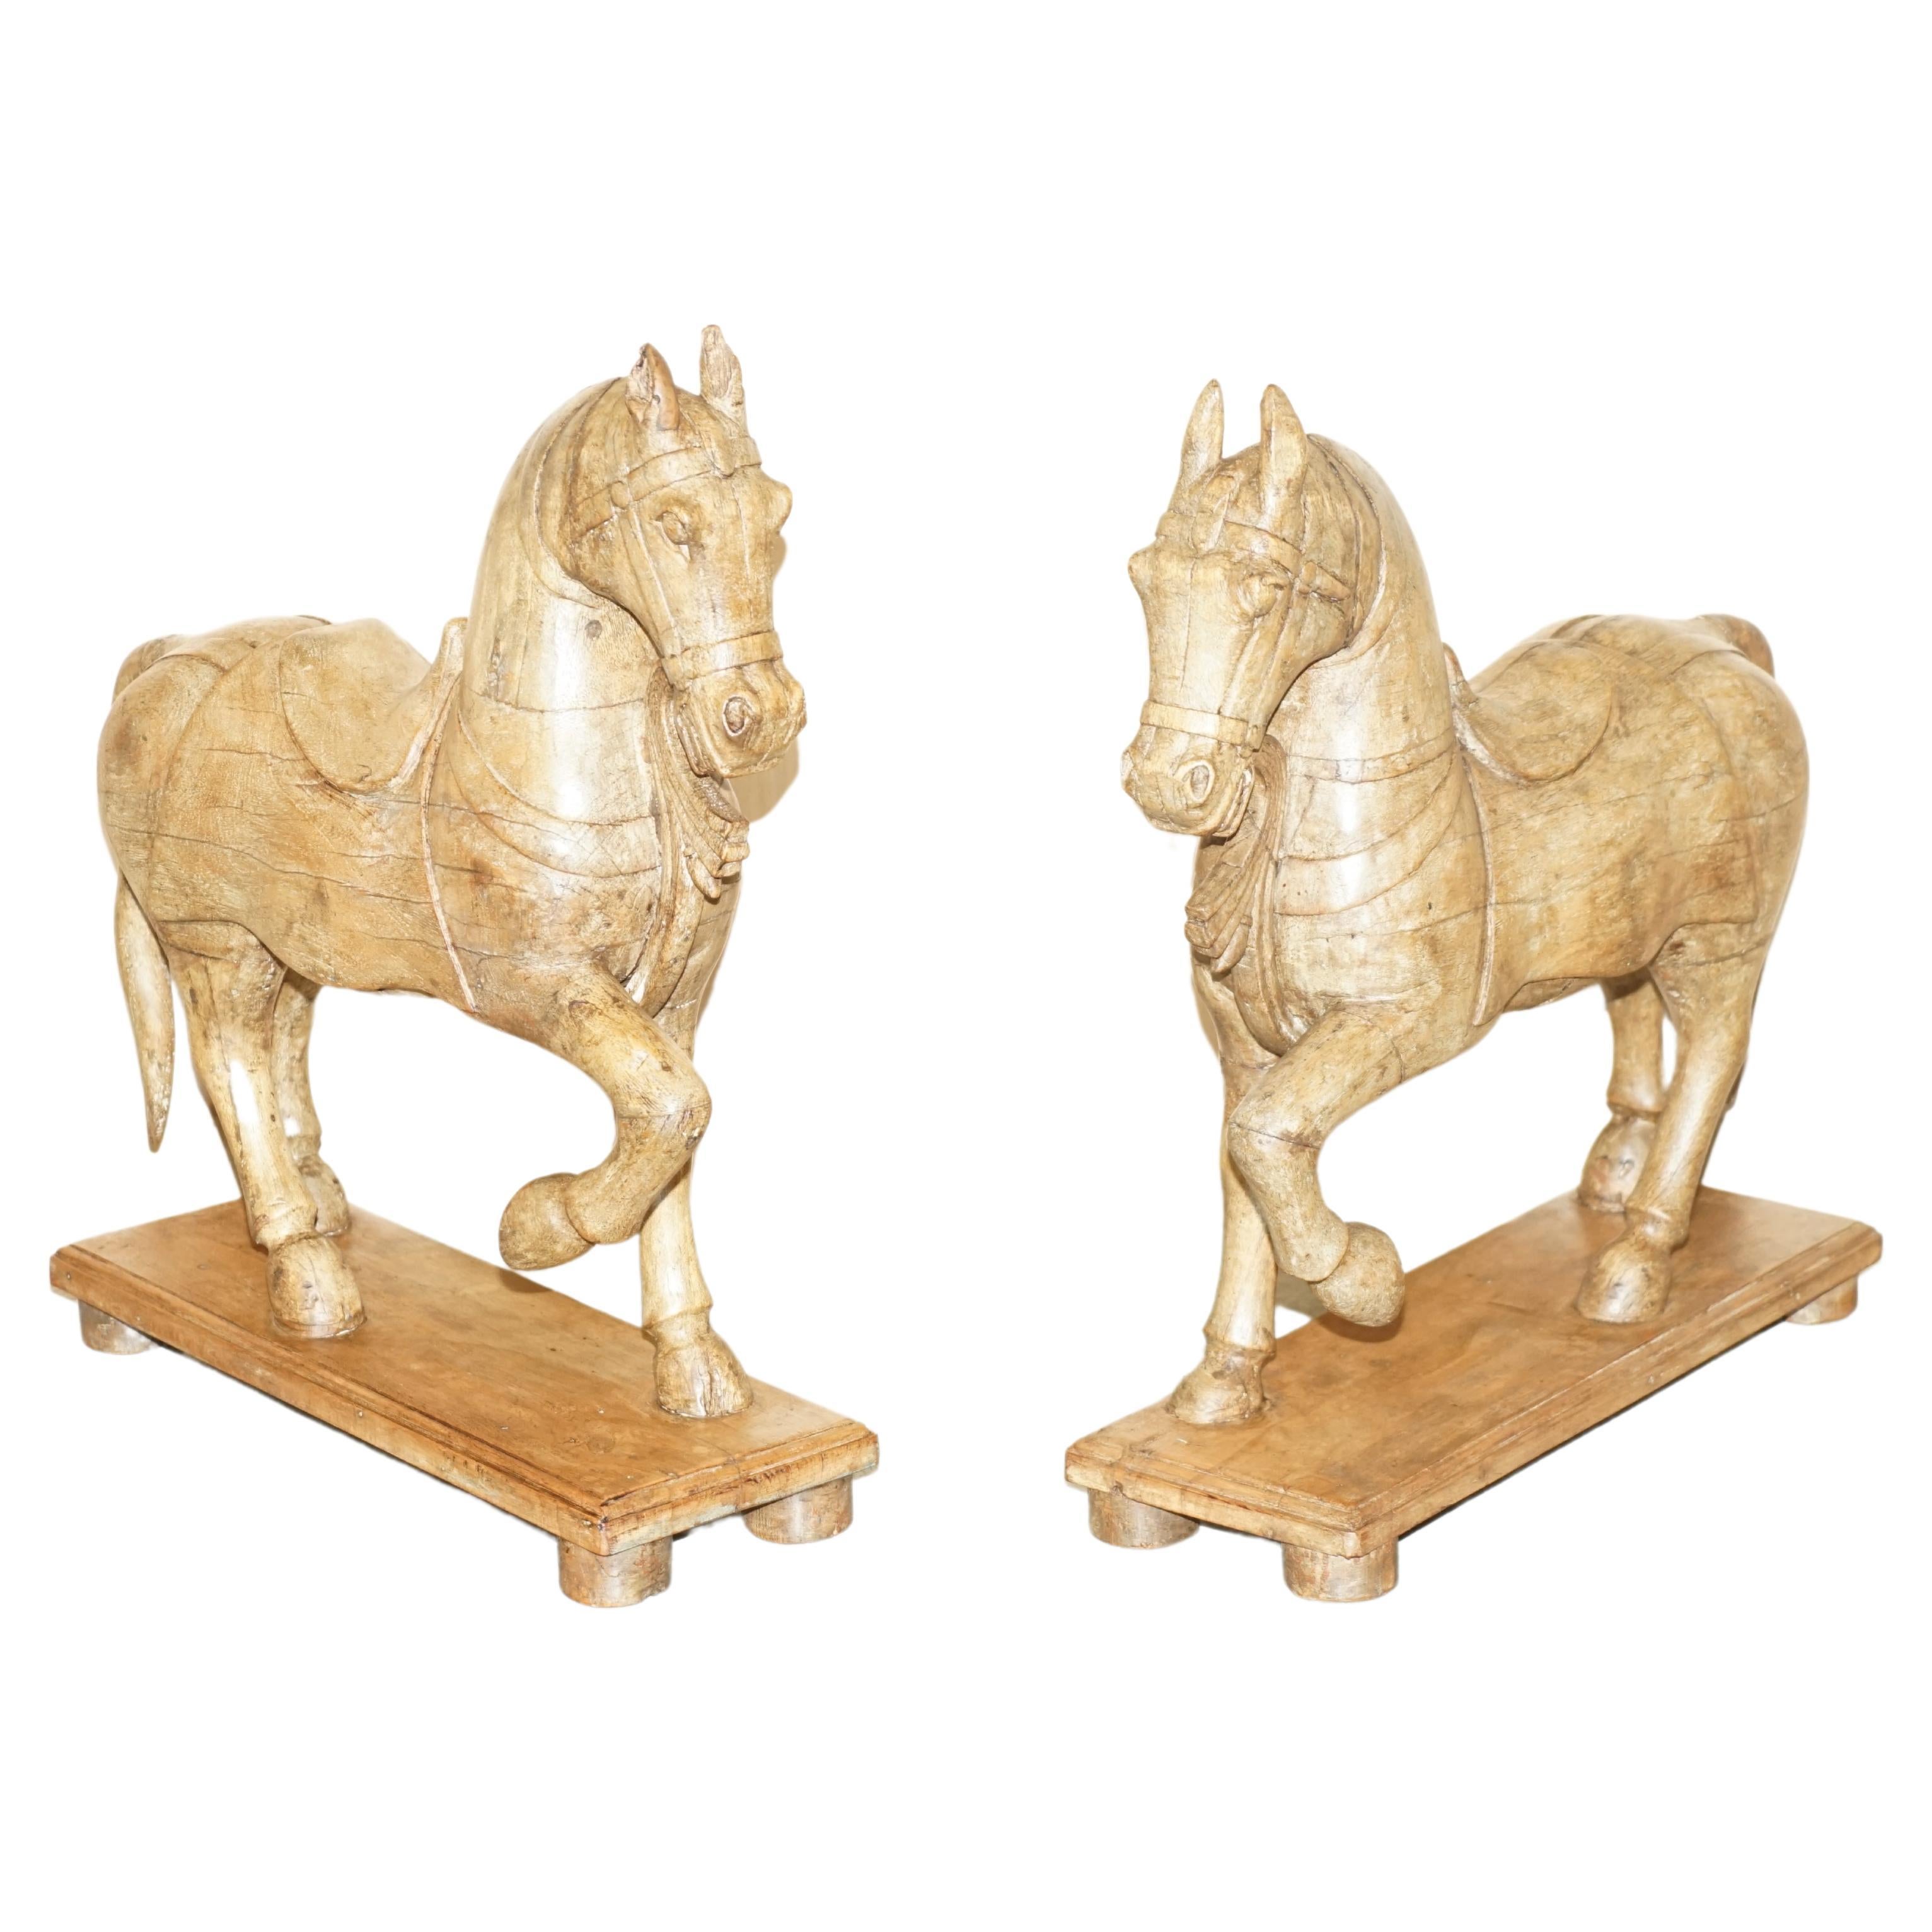 PAiR OF DECORATIVE ANTIQUE HAND CARved WOODEN STATUES OF A LOVELY HORSES im Angebot